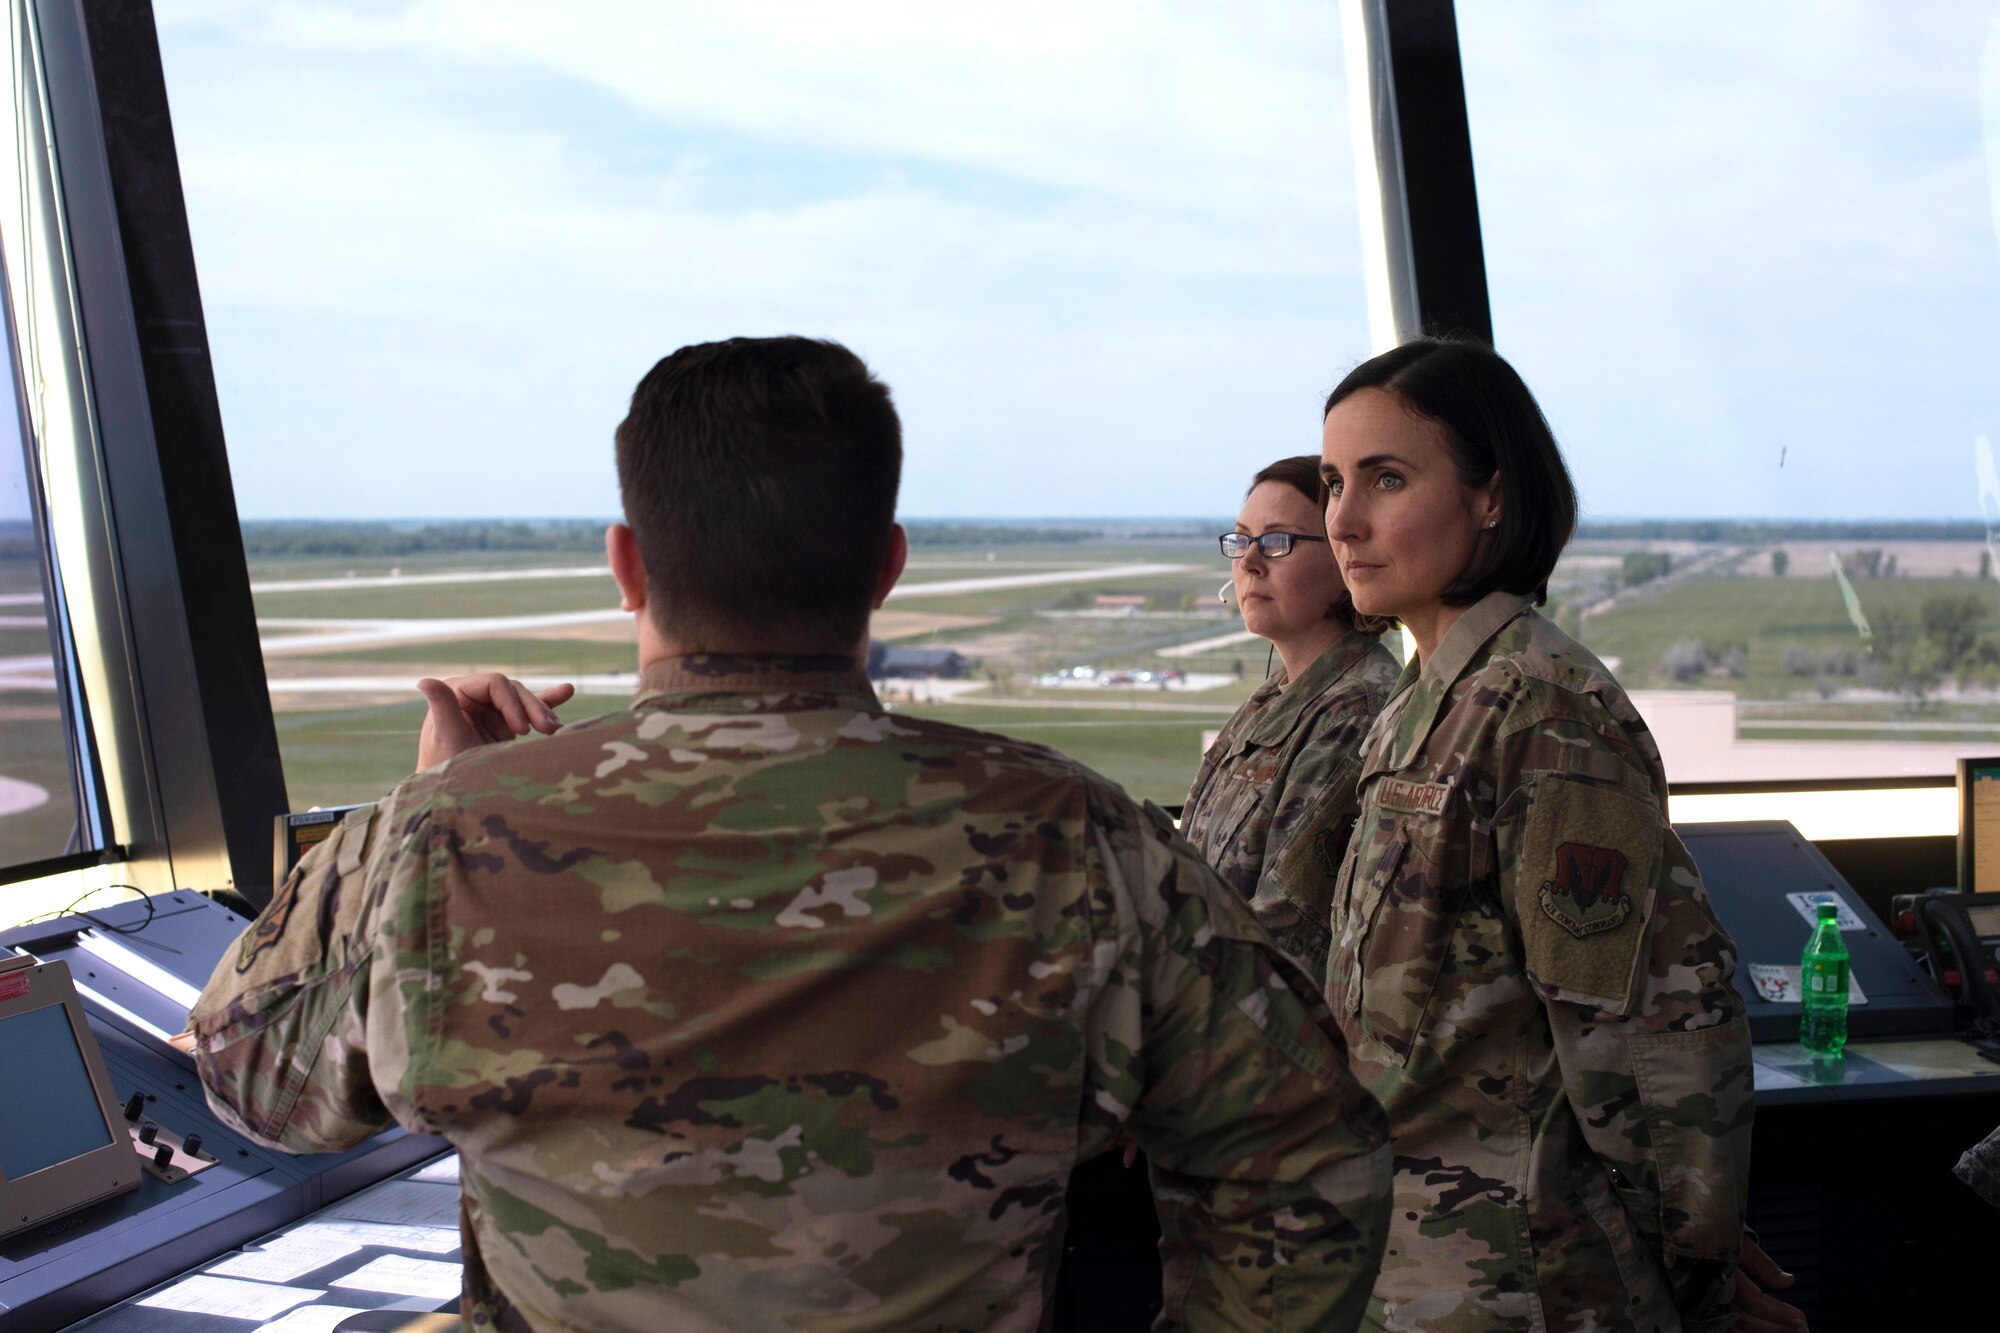 Chief Master Sgt. Summer Leifer, 25th Air Force command chief, listens to Senior Airman Matthew Mills, 319th Operations Support Squadron air traffic control journeyman, during a tour of the base air traffic control tower June 5, 2019, on Grand Forks Air Force Base, North Dakota. Leifer’s visit to Grand Forks AFB included a tour of the 319th Communications Squadron High Frequency Global Communications System, 319th Operations Support Squadron air traffic control tower and 69th Reconnaissance Group static display of an RQ-4 Global Hawk. (U.S. Air Force photo by Senior Airman Elora J. Martinez)